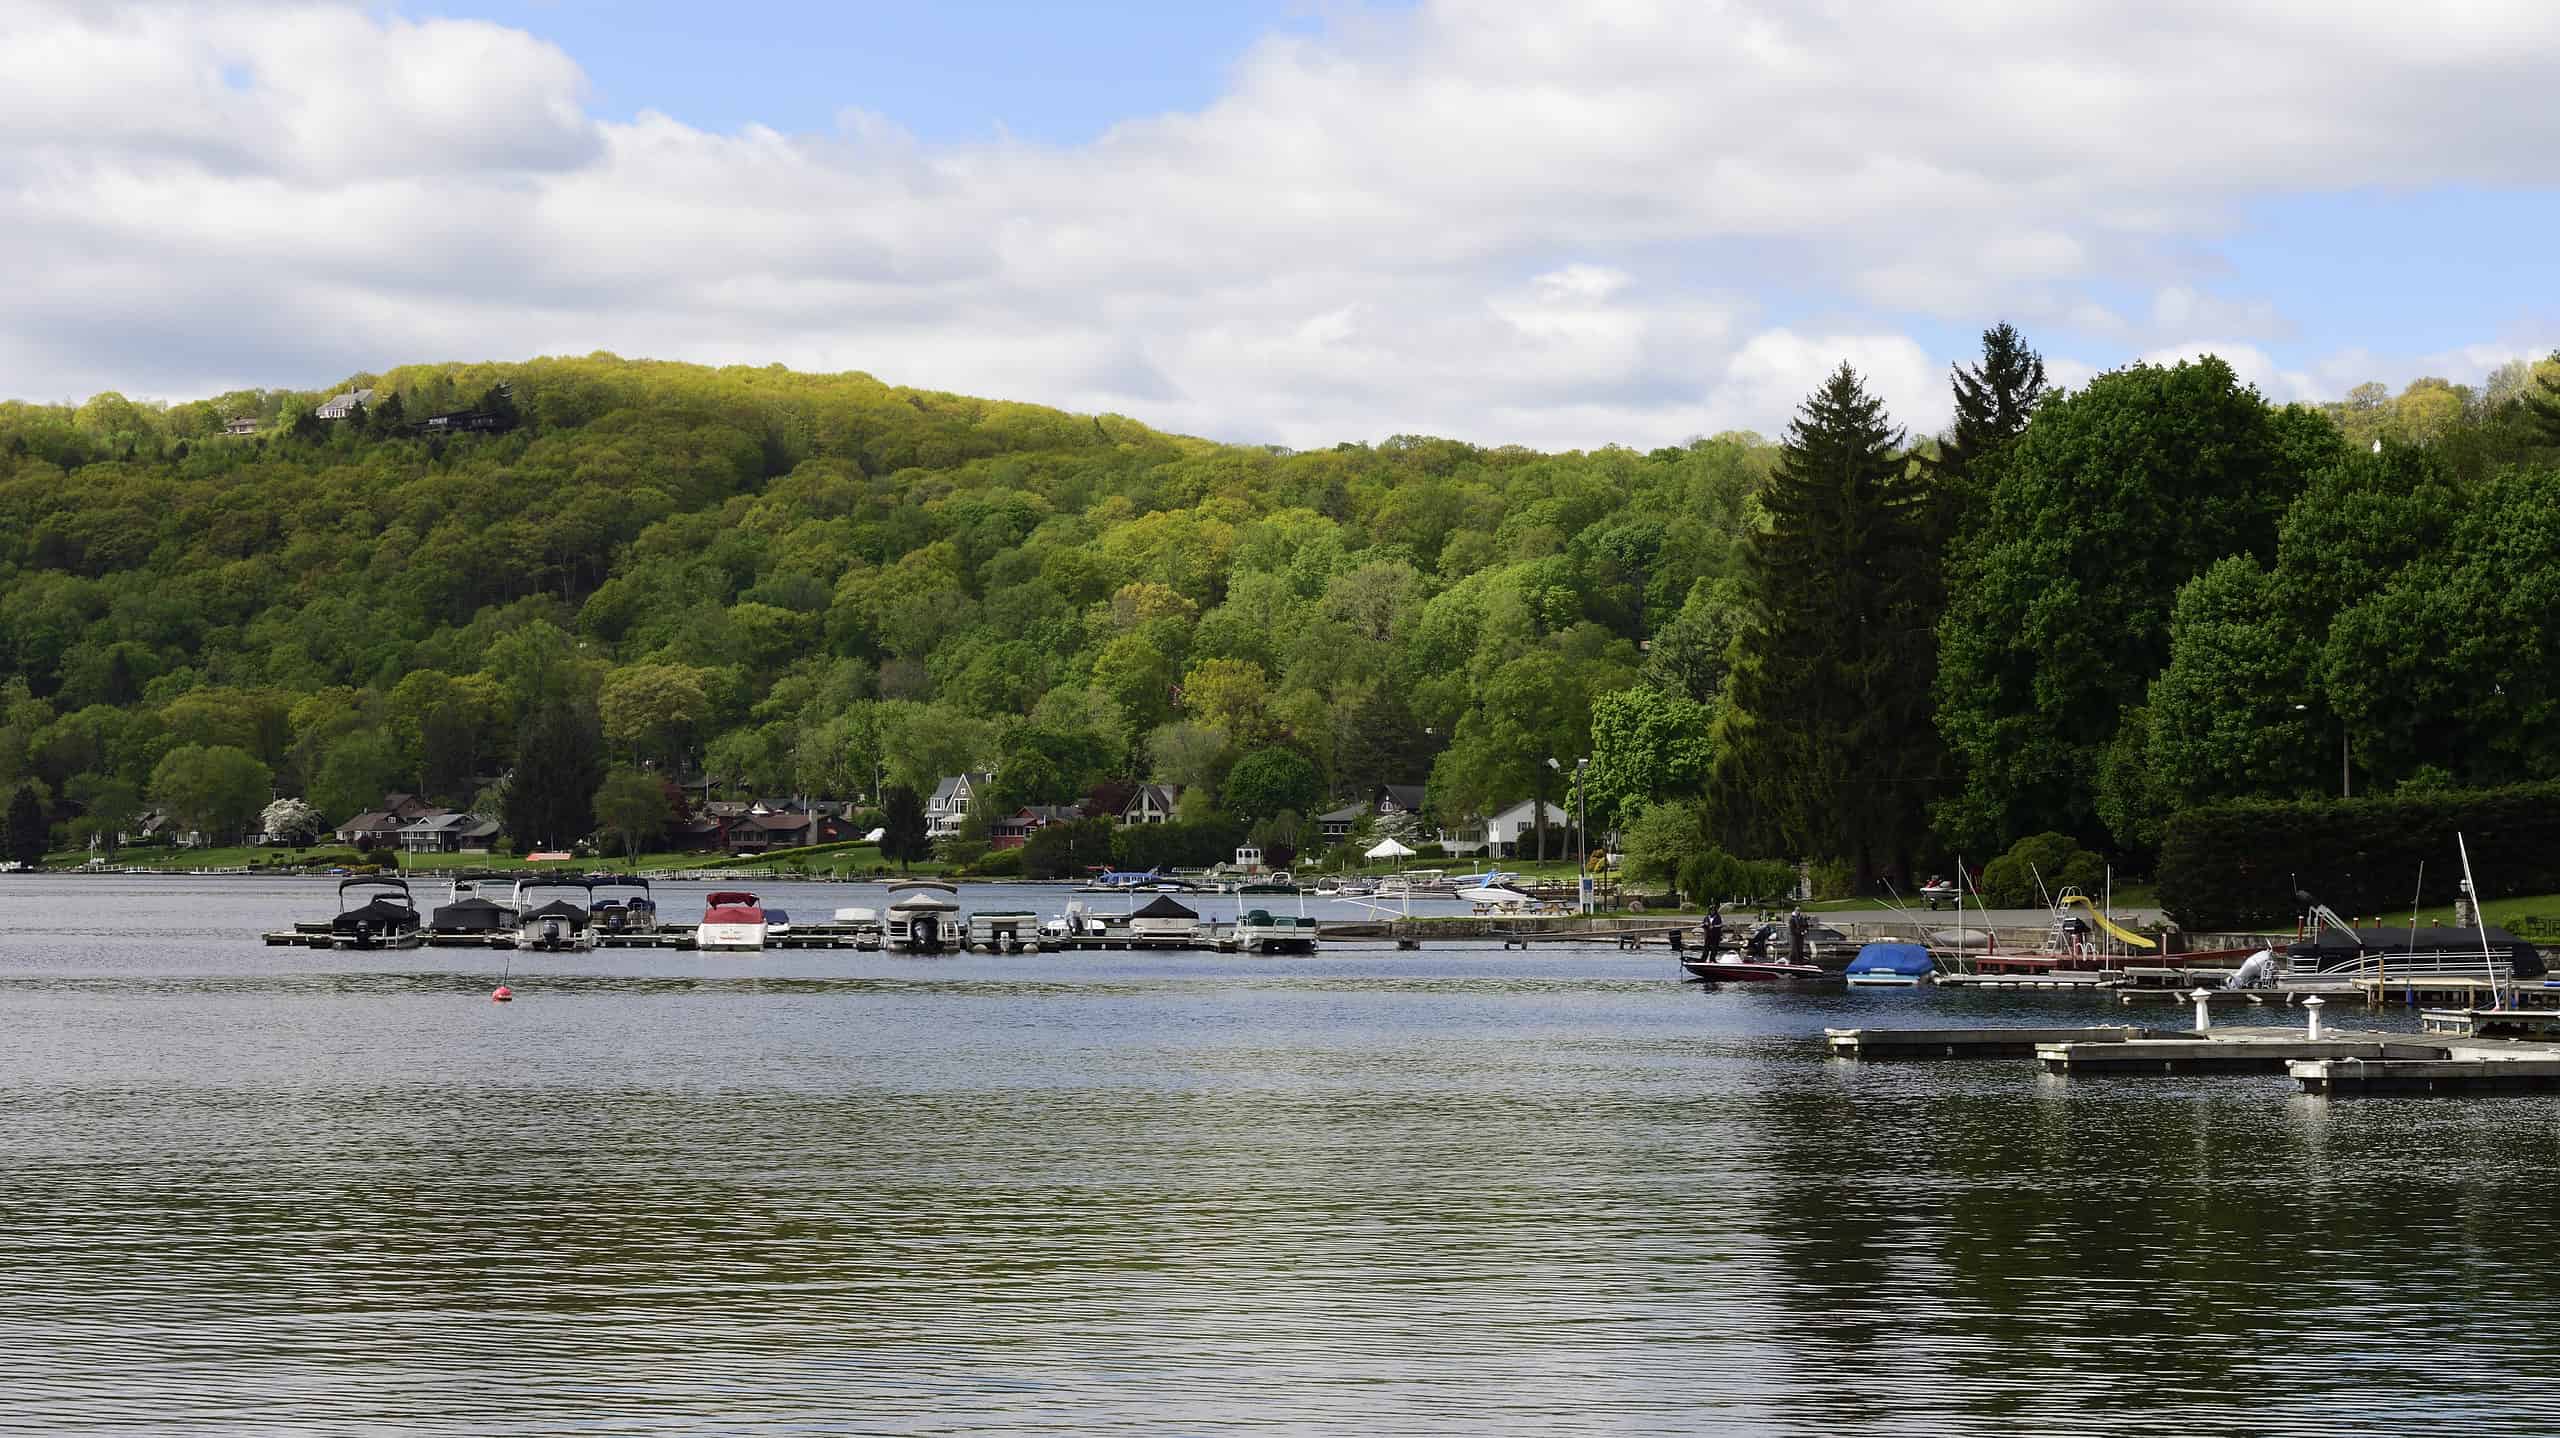 Candlewood Lake on a peaceful summer morning with boats docked and mountainside in background,New Fairfield,Connecticut.